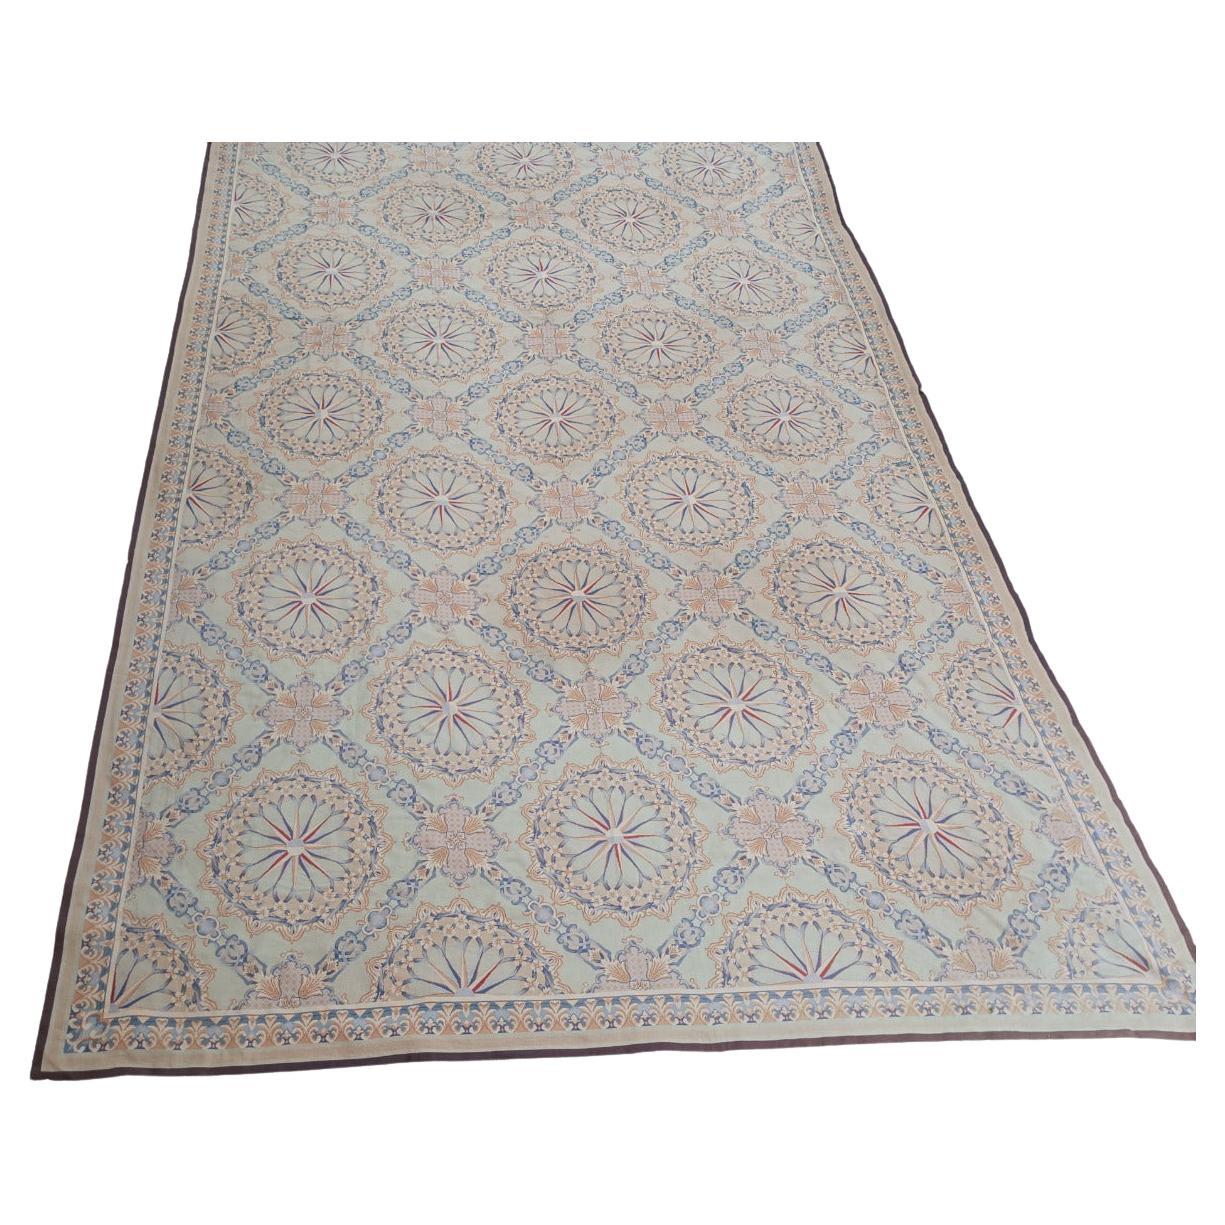 Large needle point rug 670x 430 cm.  (1980) vintage "France style"   For Sale